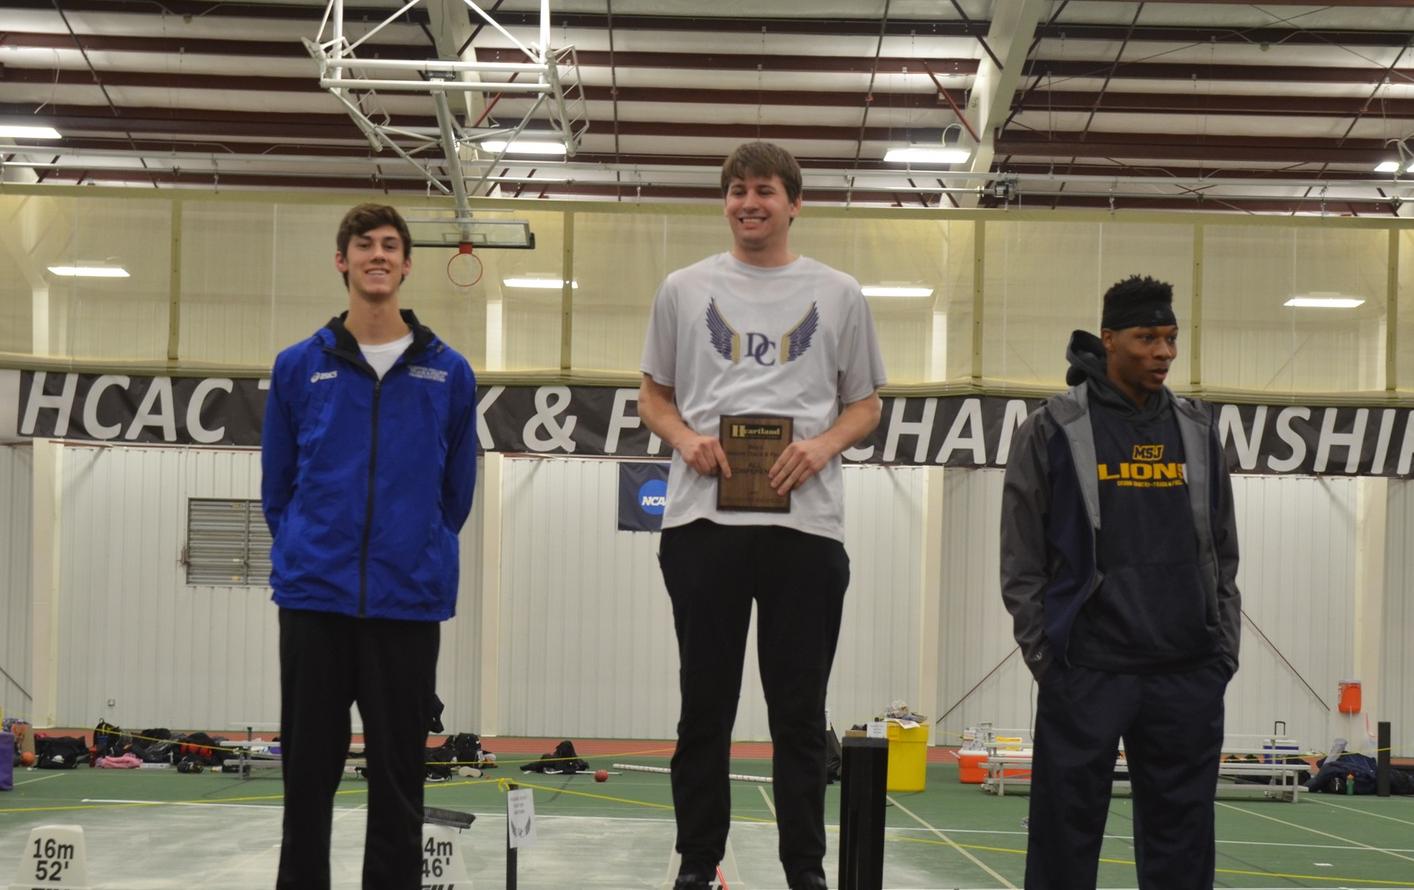 Jackson Leads DC at the HCAC Indoor Championships